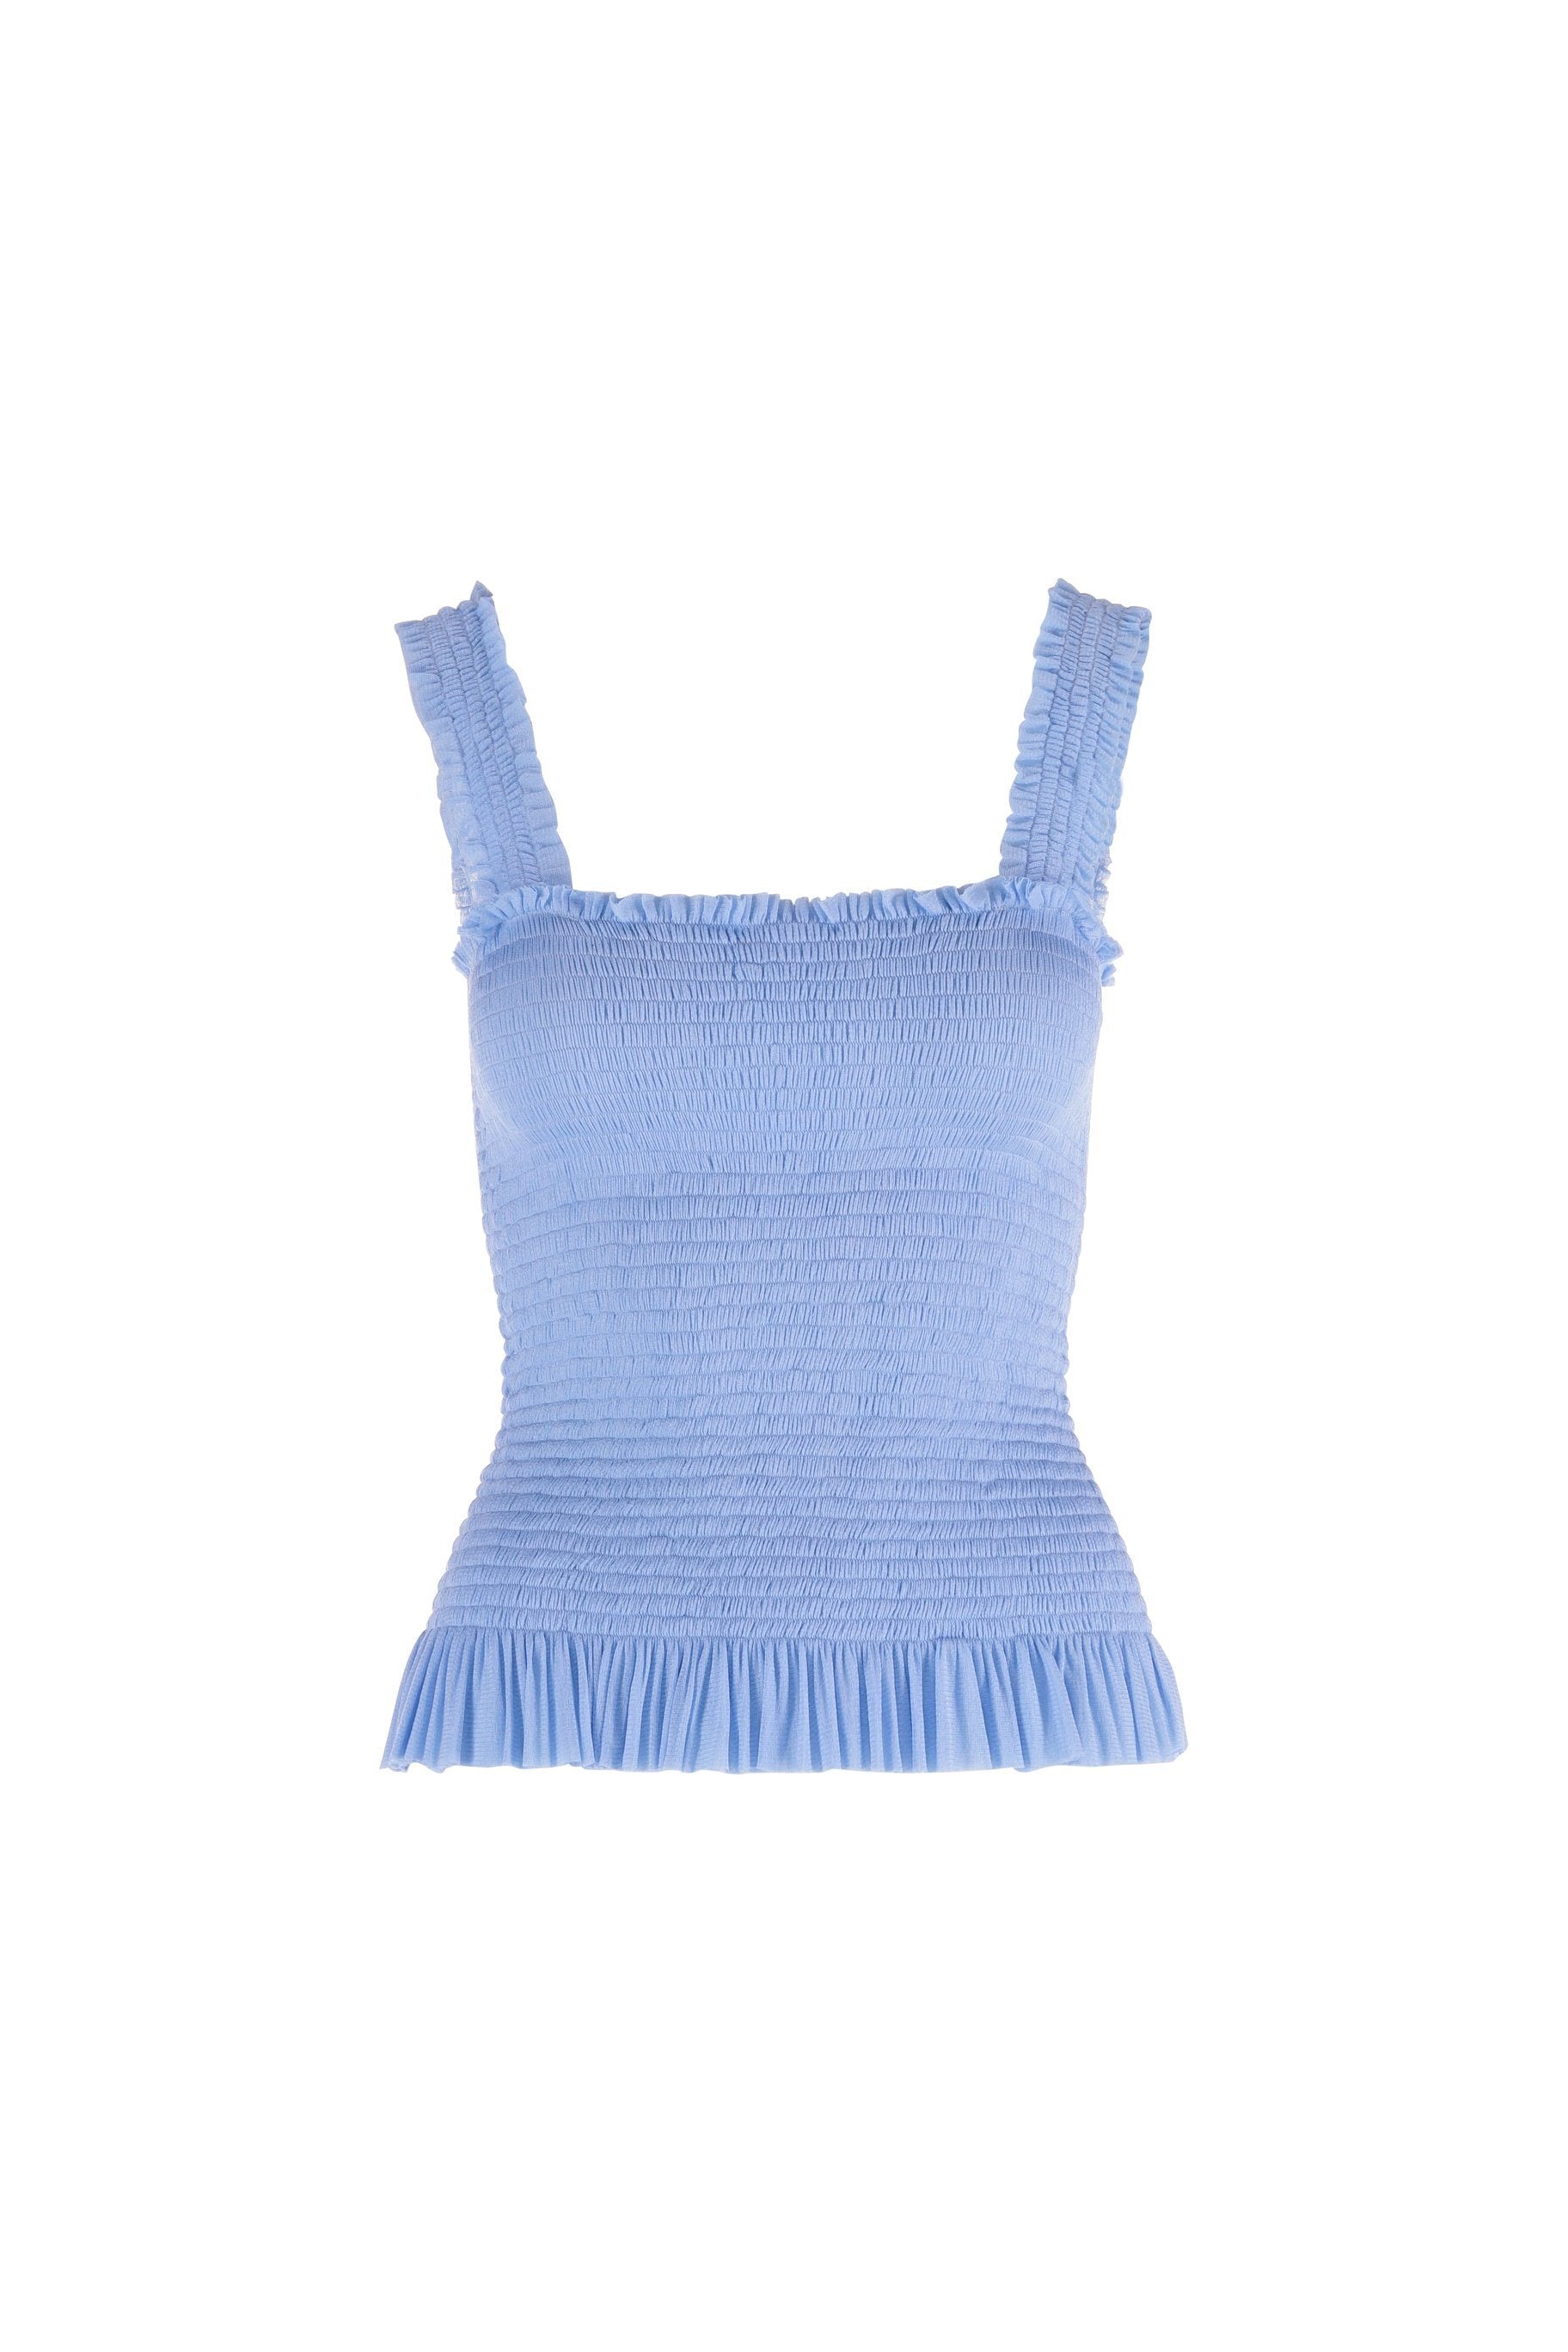 Eugenie Long Top  Blue